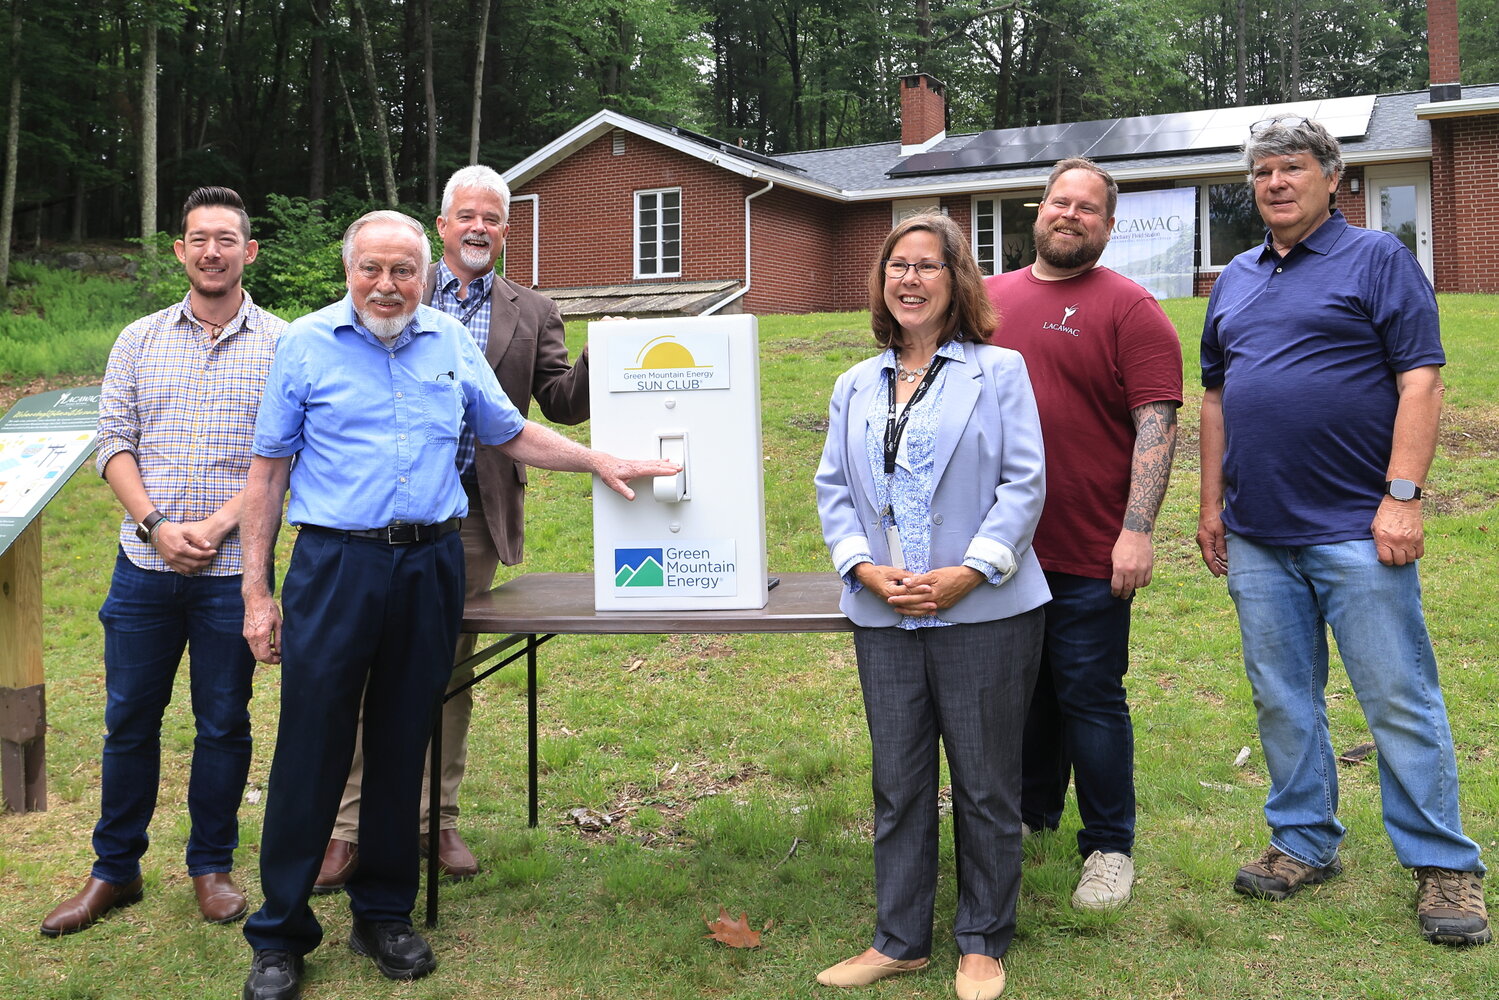 A Flip the Switch ceremony at Lacawac Sanctuary's William E. Chatlos Enivornmental Education Center building was held on June 28. It symbolized taking the building off the grid. Solar panels and a generous donation of nearly $43,000 from Green Mountain Energy Sun Club made it possible. Pictured are Johnny Richardson, left; Milton Roegner; James Shook; Jocelyn Cramer; Craig Lukatch; and Bill Leishear...